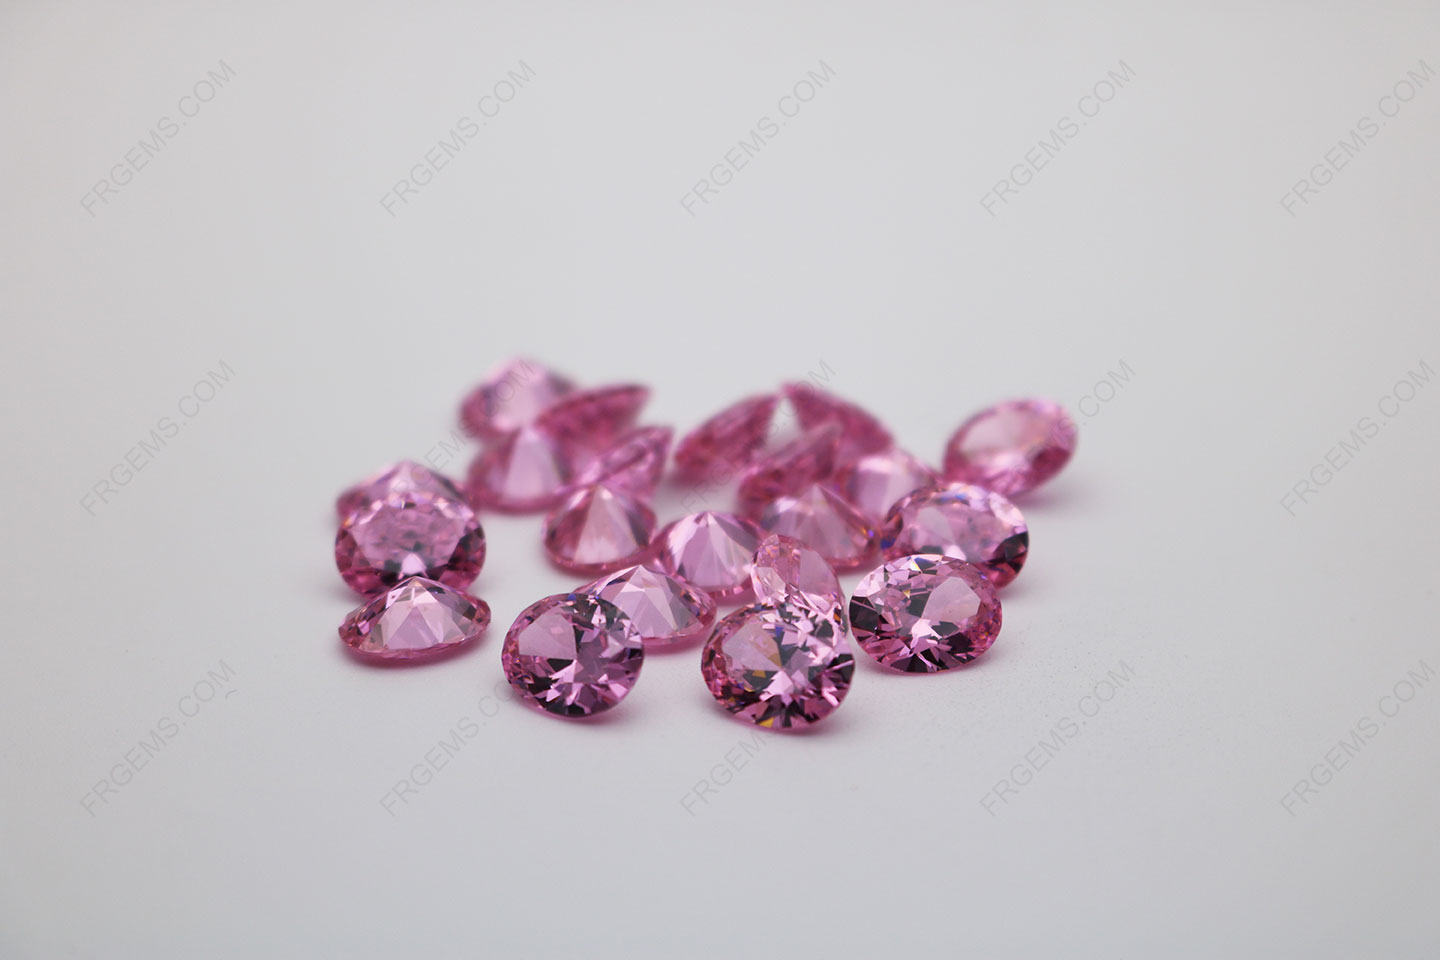 Cubic Zirconia Pink Oval Shape diamond faceted cut 10x8mm stones CZ03 IMG_0393